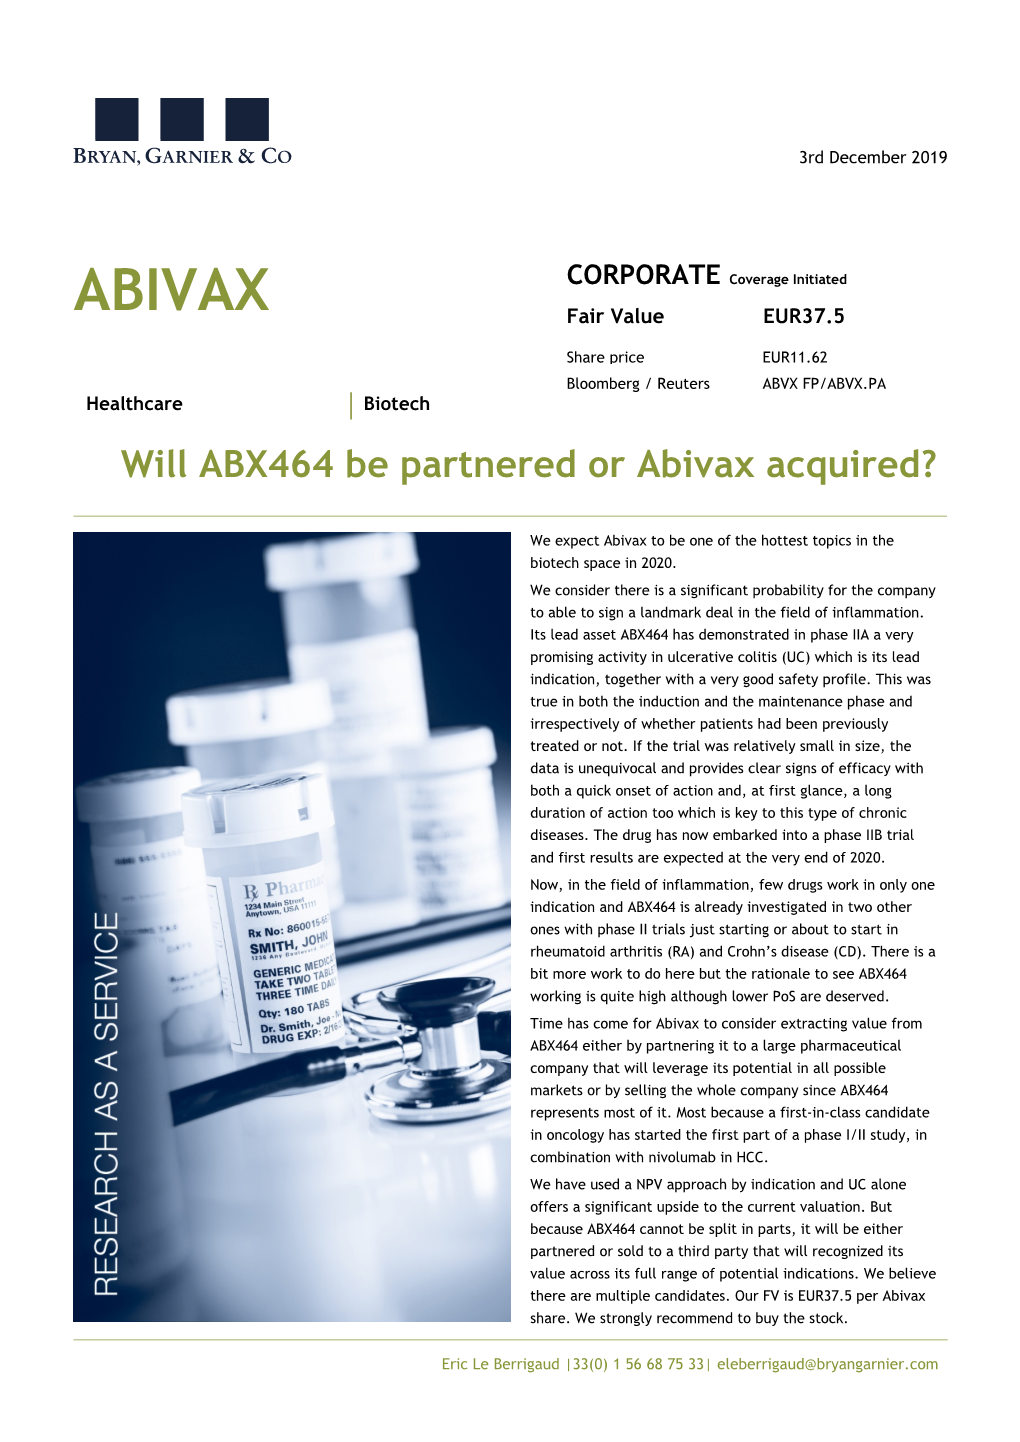 Will ABX464 Be Partnered Or Abivax Acquired?